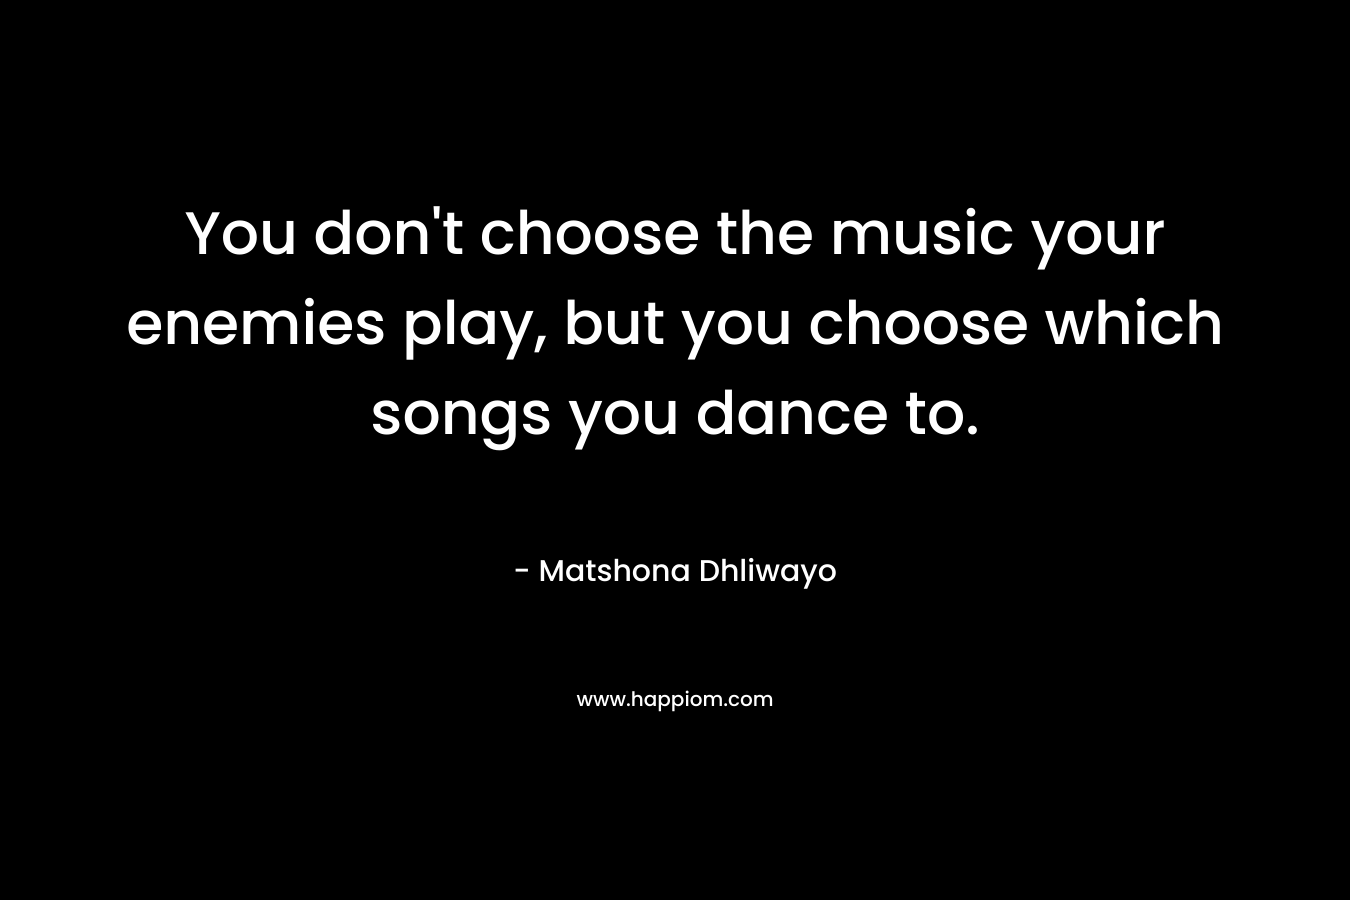 You don't choose the music your enemies play, but you choose which songs you dance to.